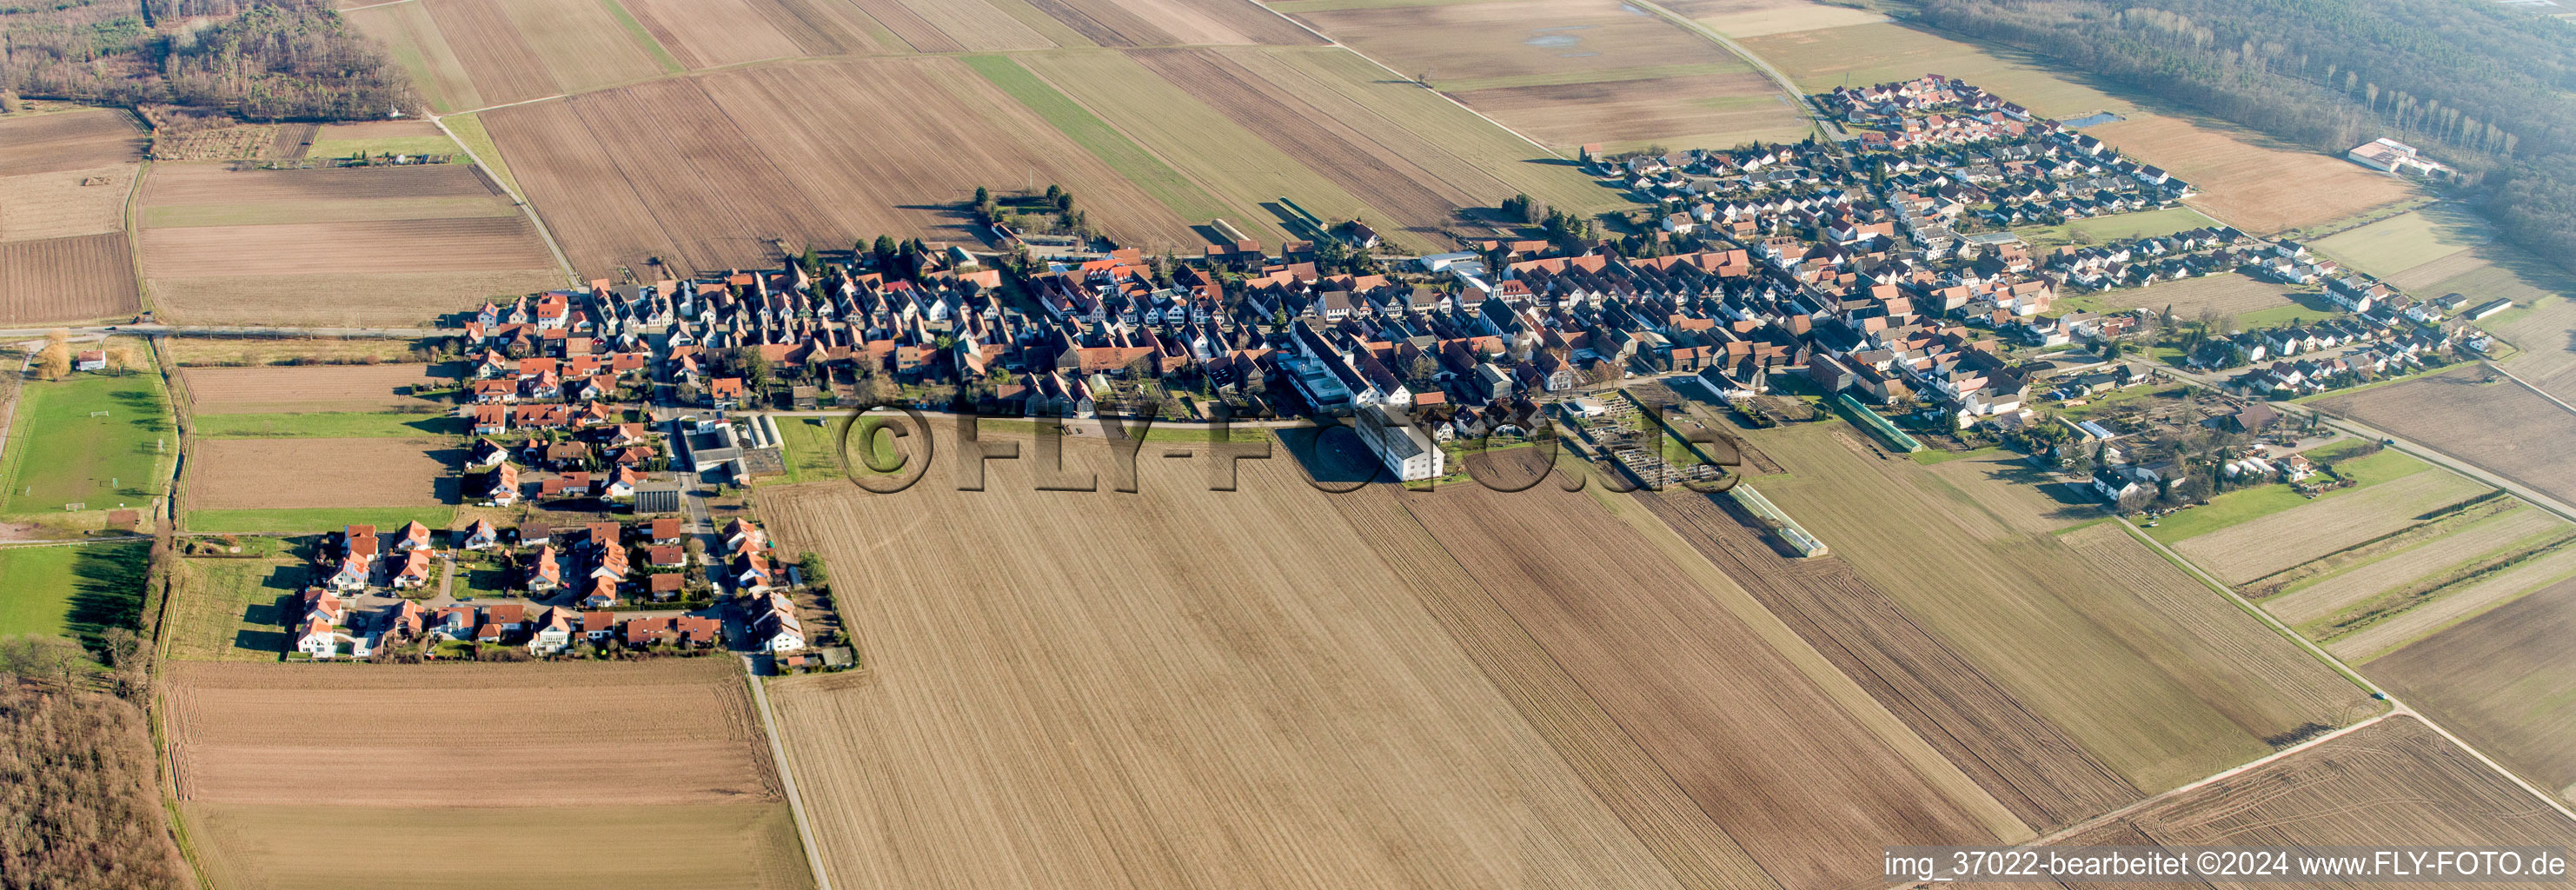 Aerial photograpy of Village - view on the edge of agricultural fields and farmland in the district Hayna in Herxheim bei Landau (Pfalz) in the state Rhineland-Palatinate, Germany